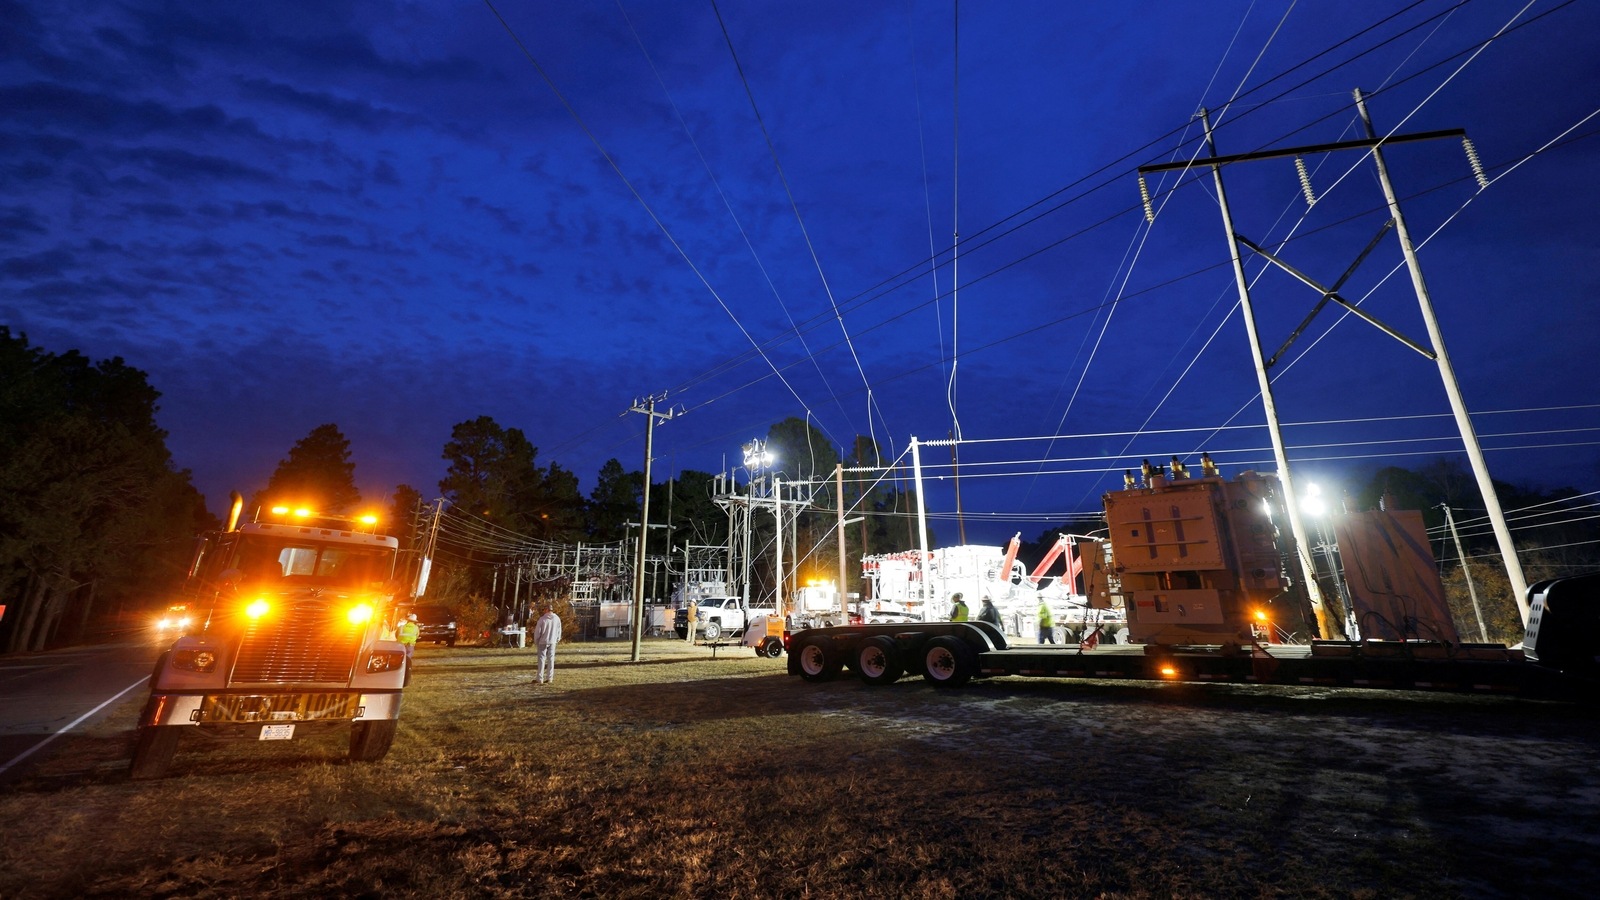 outages-could-last-days-after-shootings-at-substations-world-news-hindustan-times